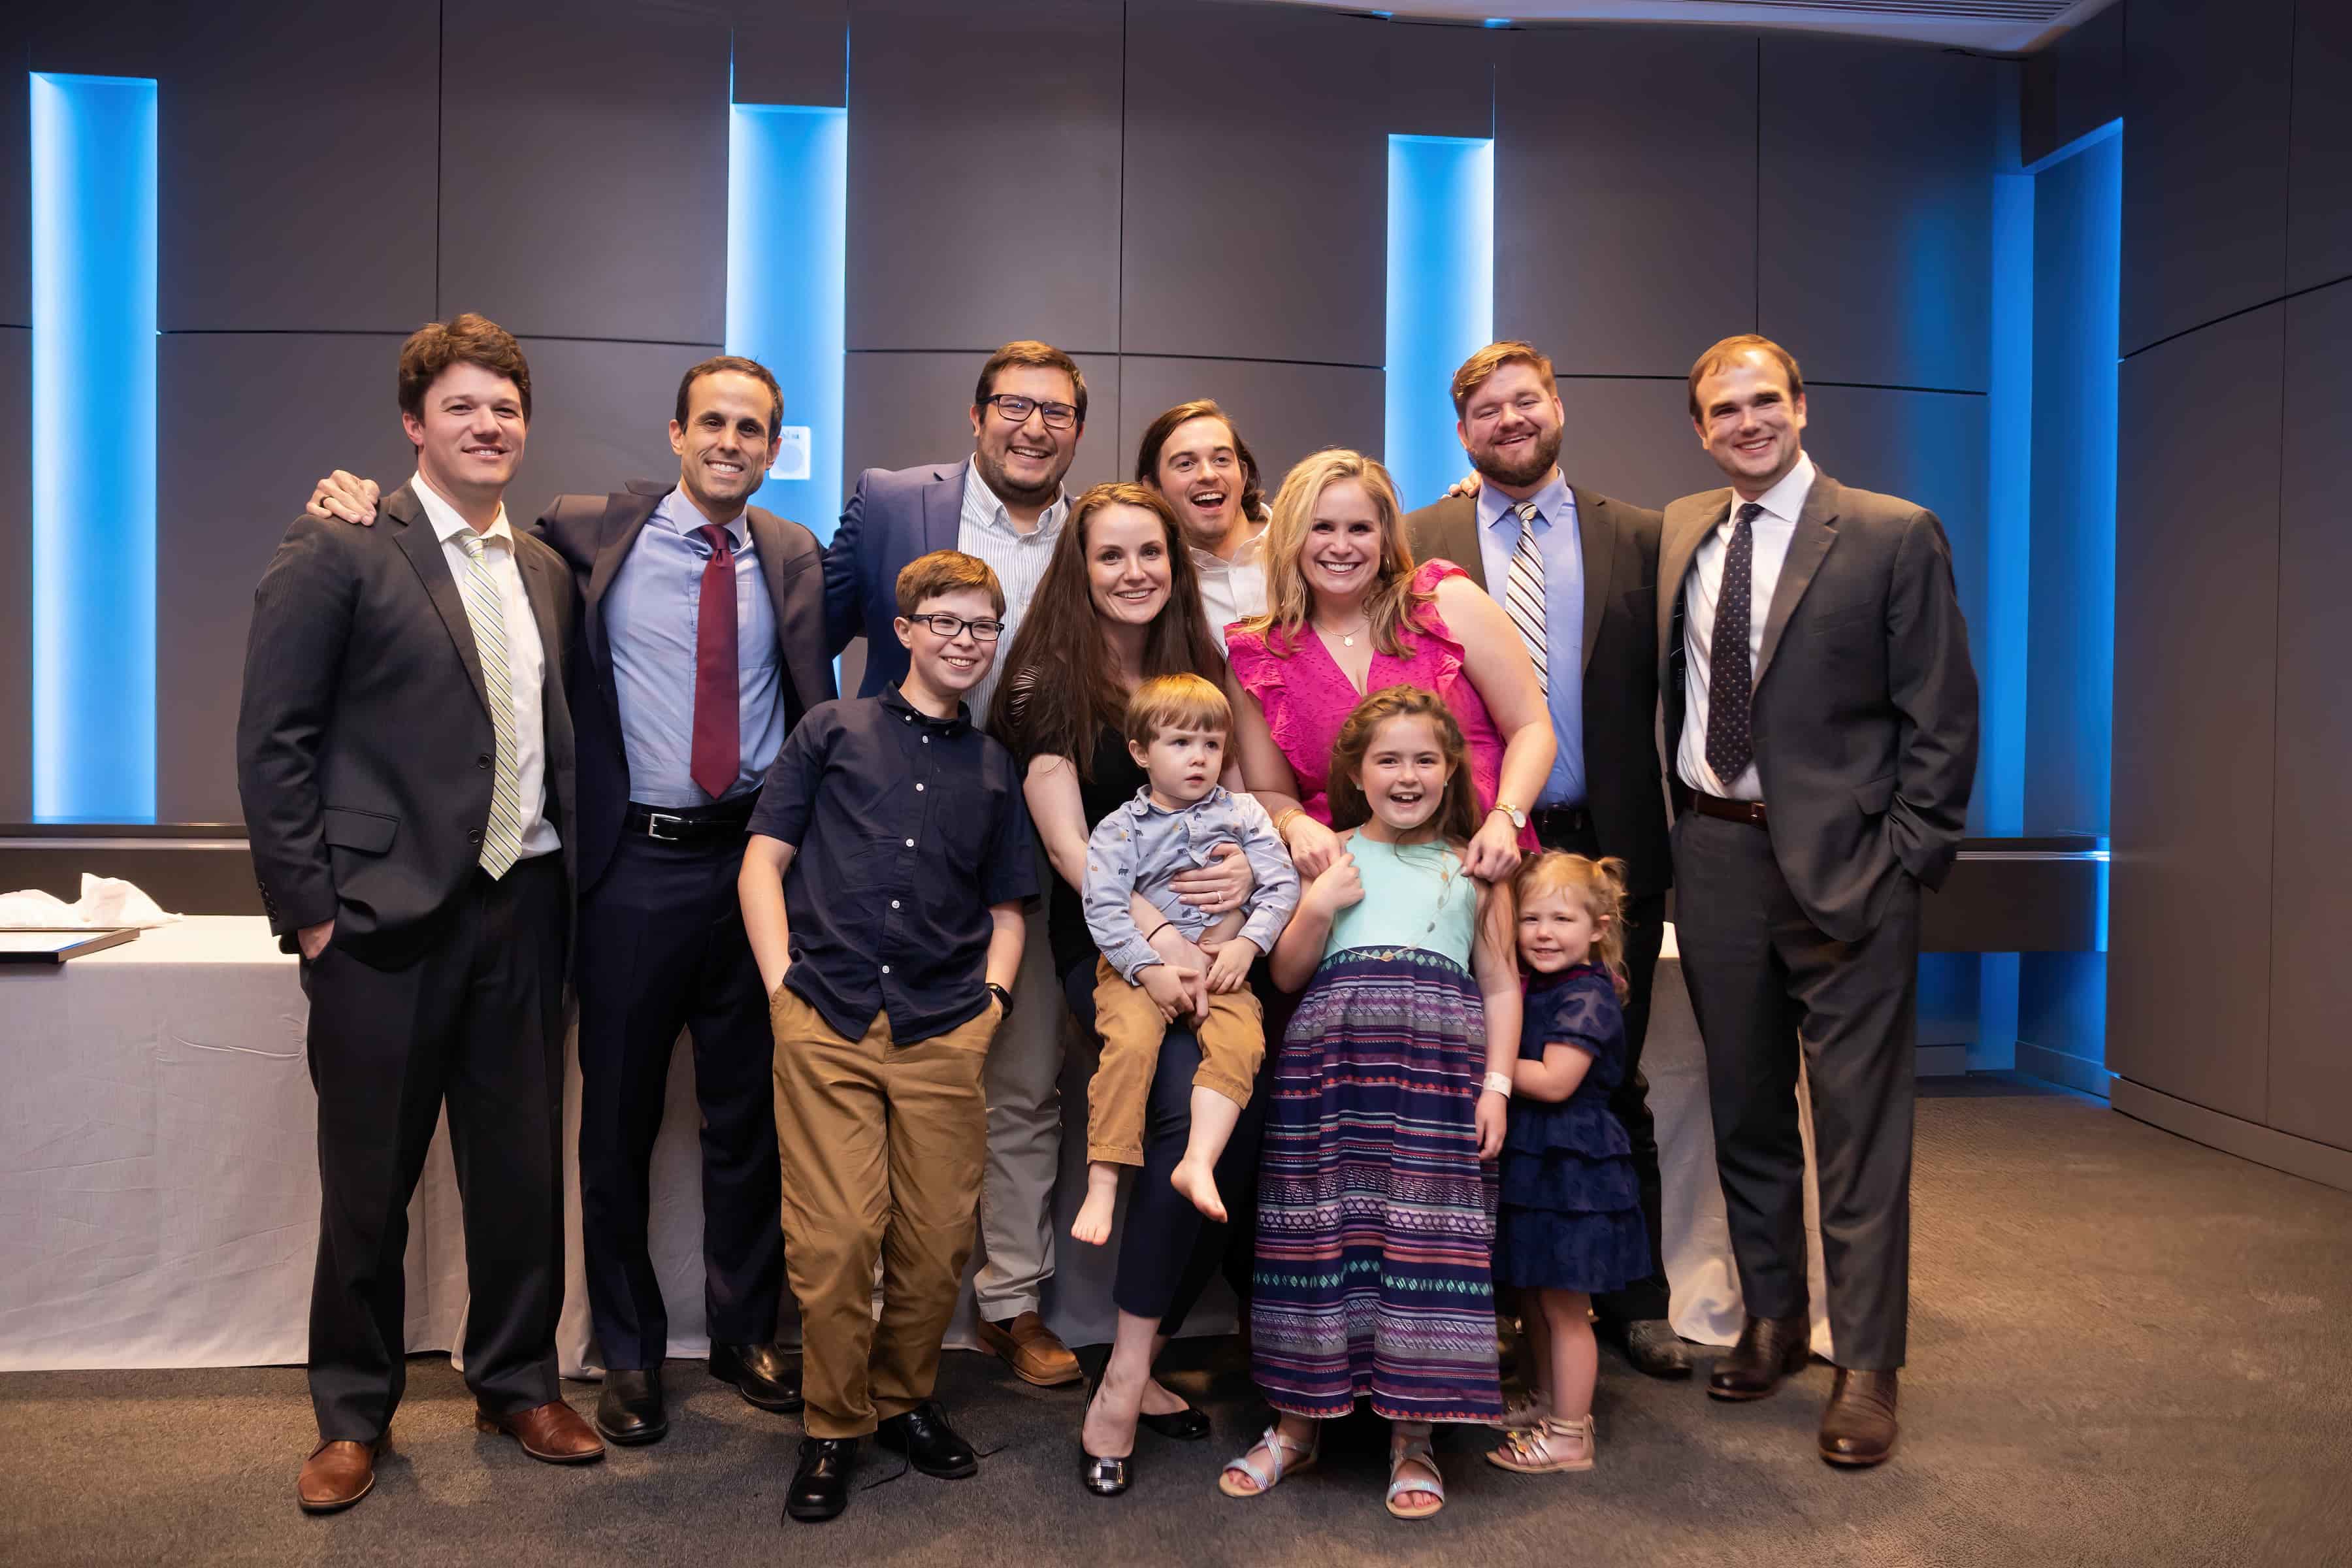 Several of the Graduating Anesthesia Residents with their Families